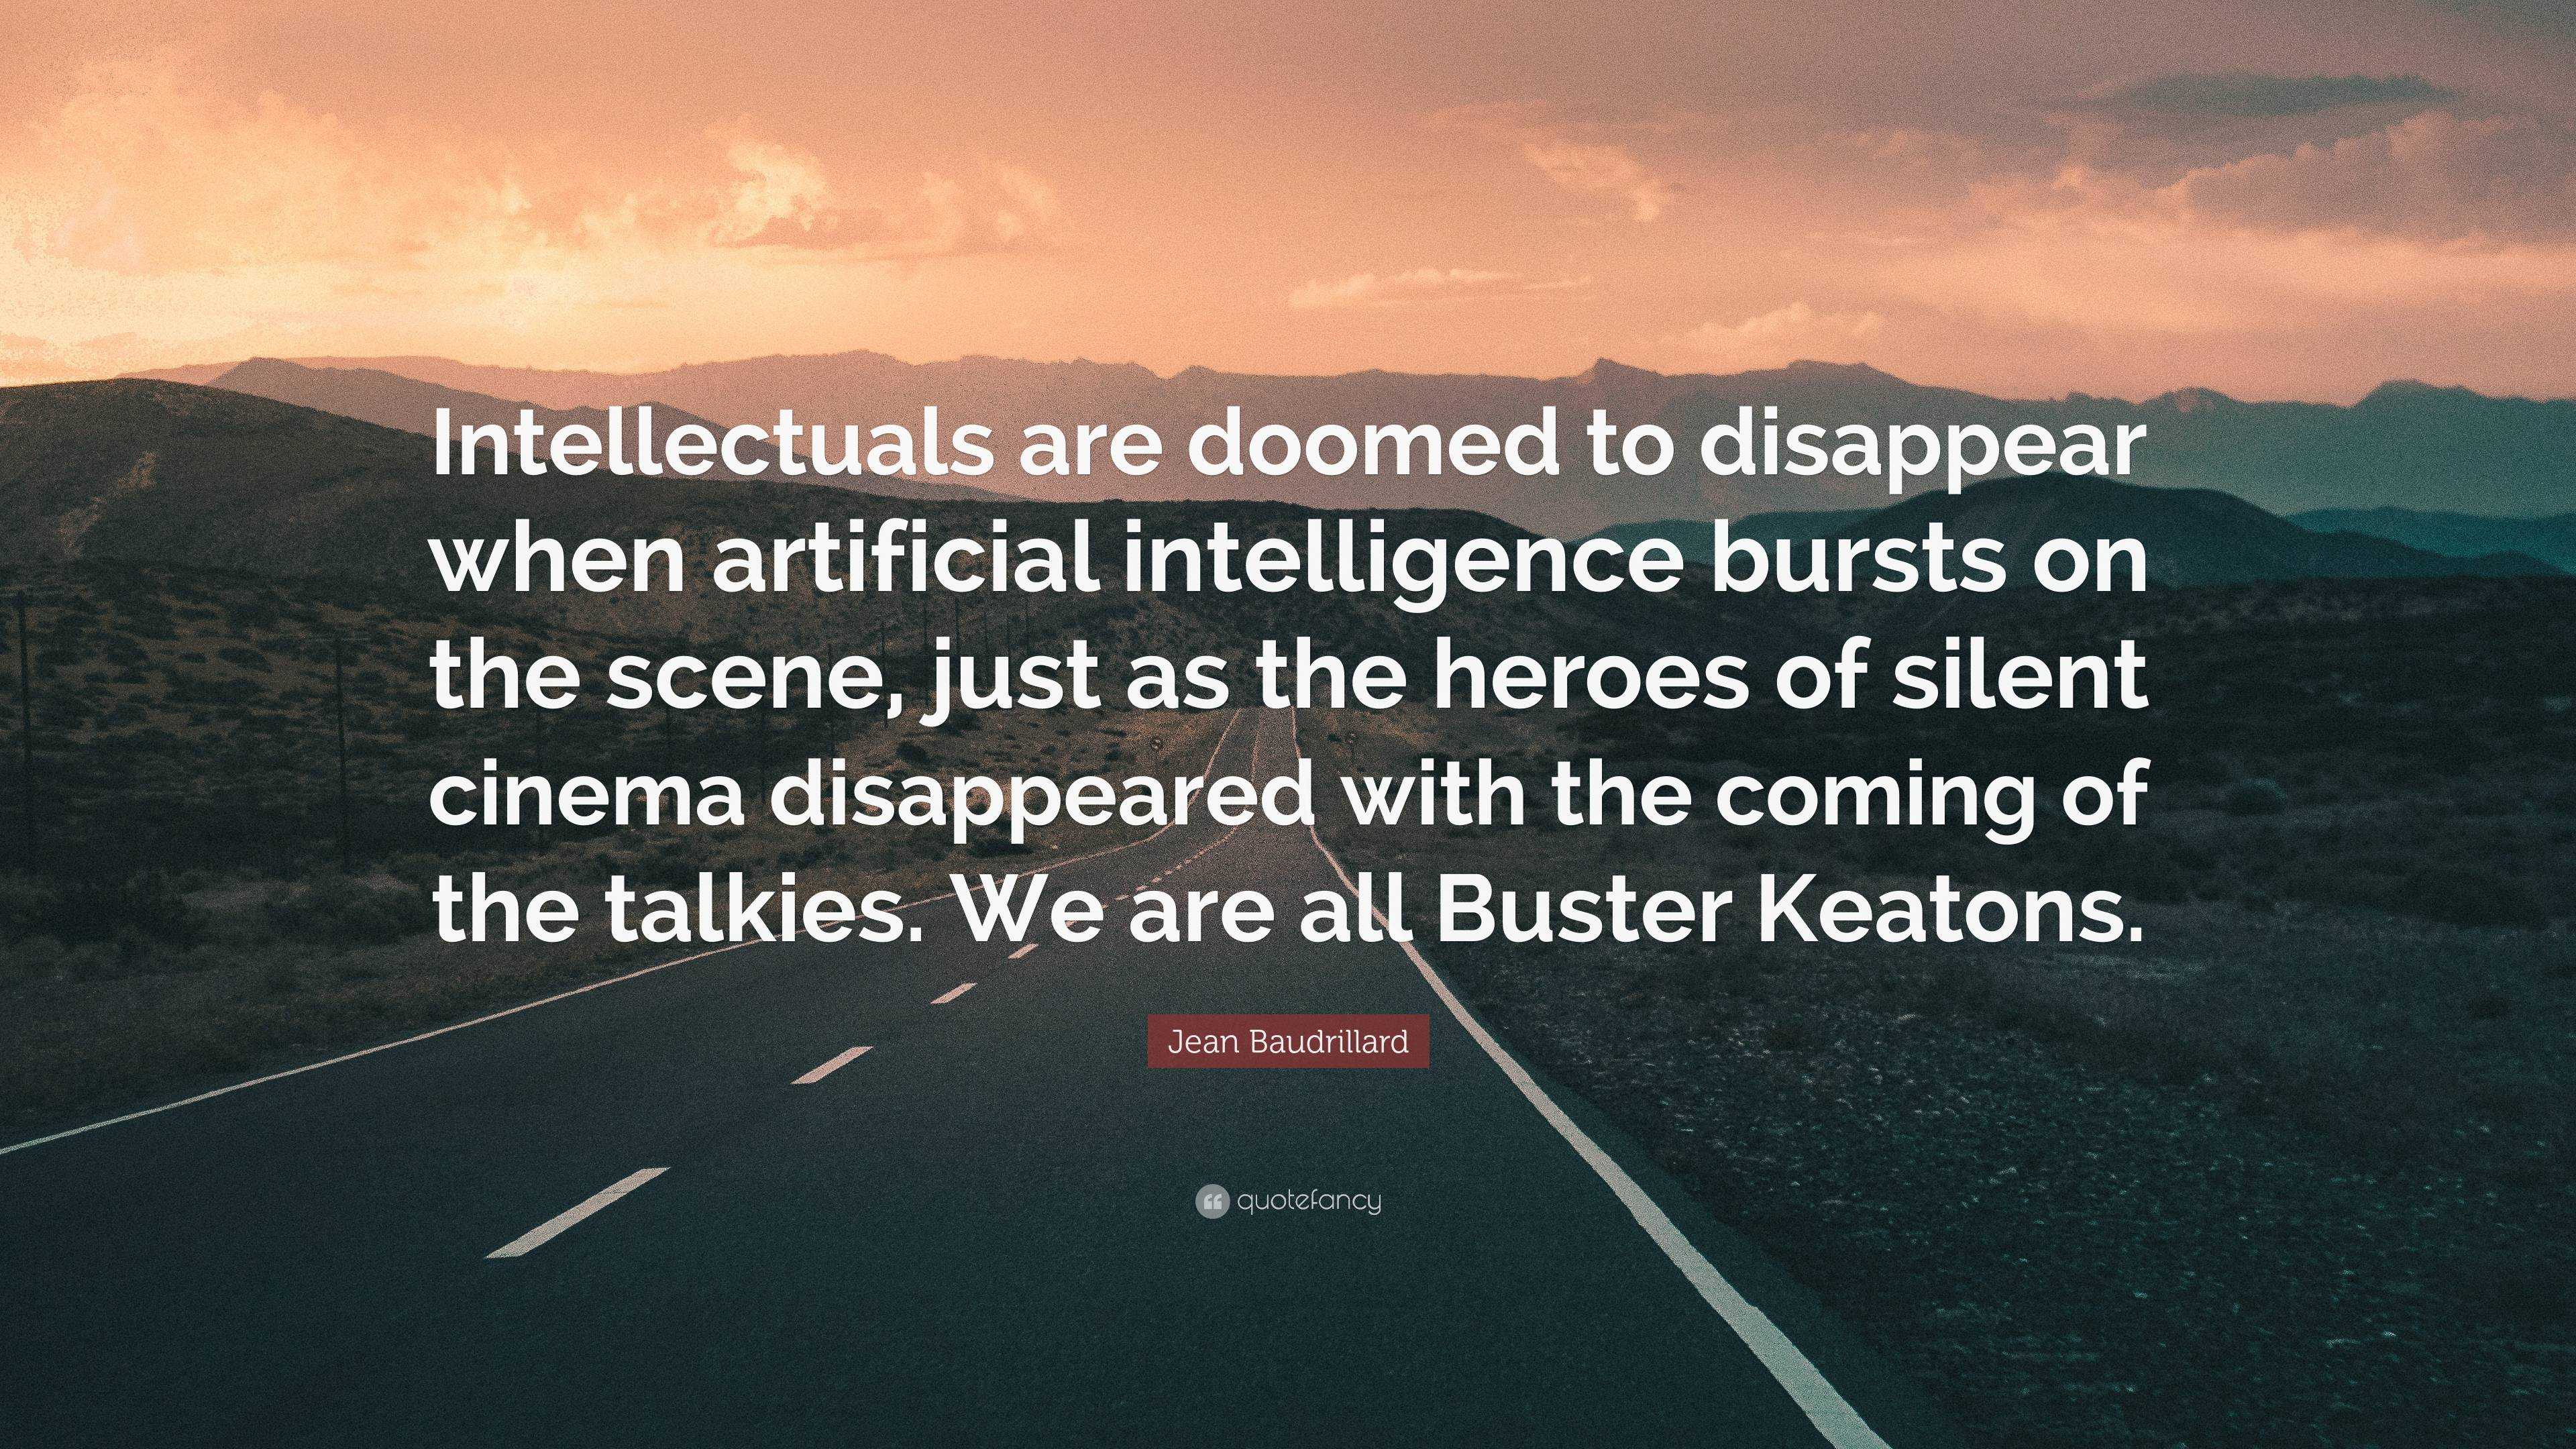 kaas Turbulentie Eed Jean Baudrillard Quote: “Intellectuals are doomed to disappear when artificial  intelligence bursts on the scene, just as the heroes of silent cin...”